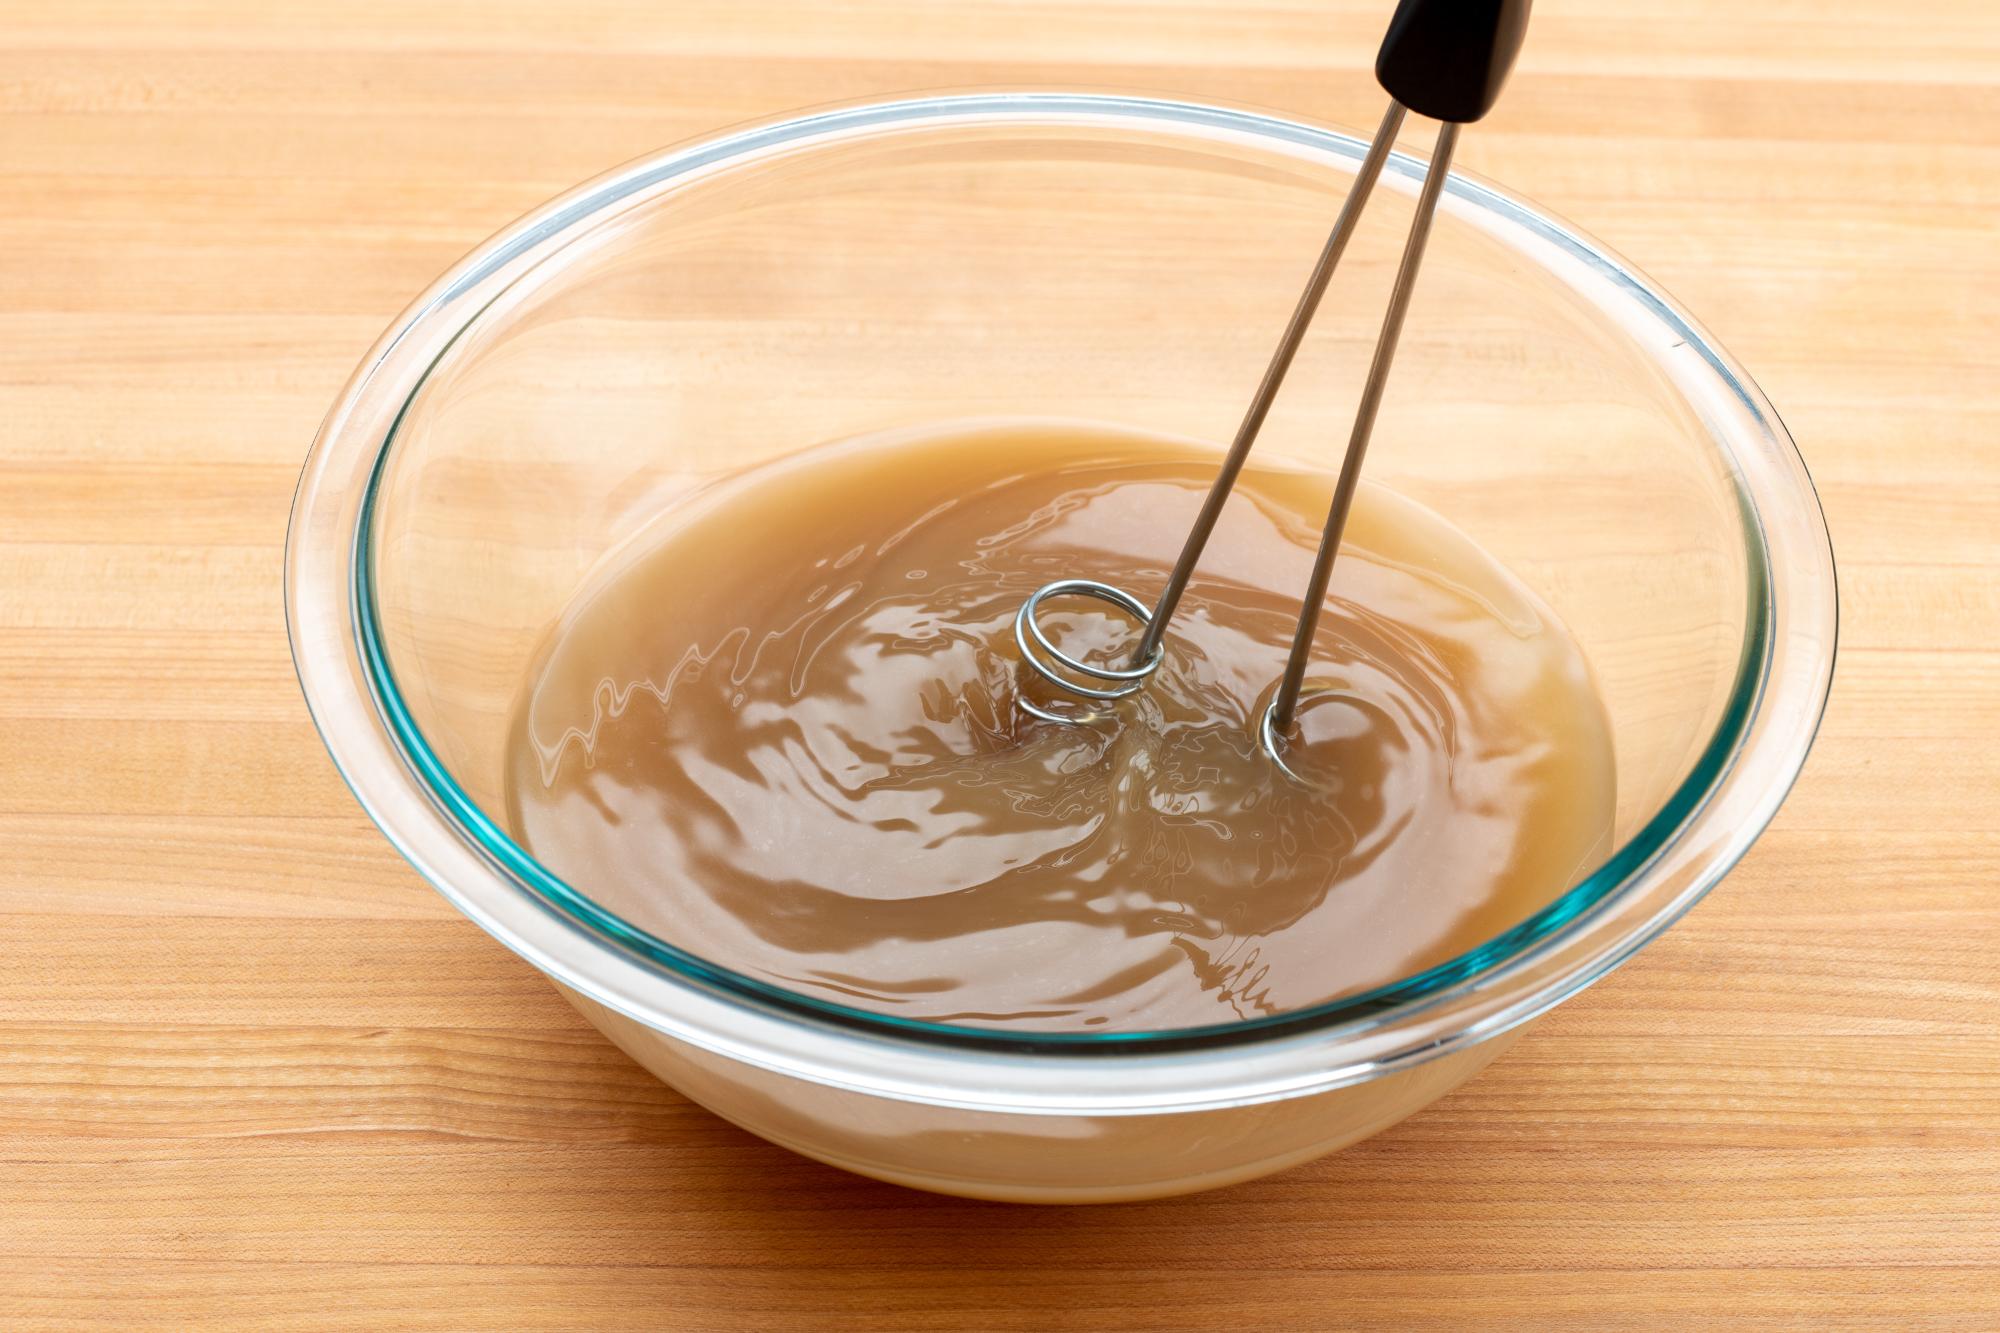 Whisking the stock with a Mix-Stir.